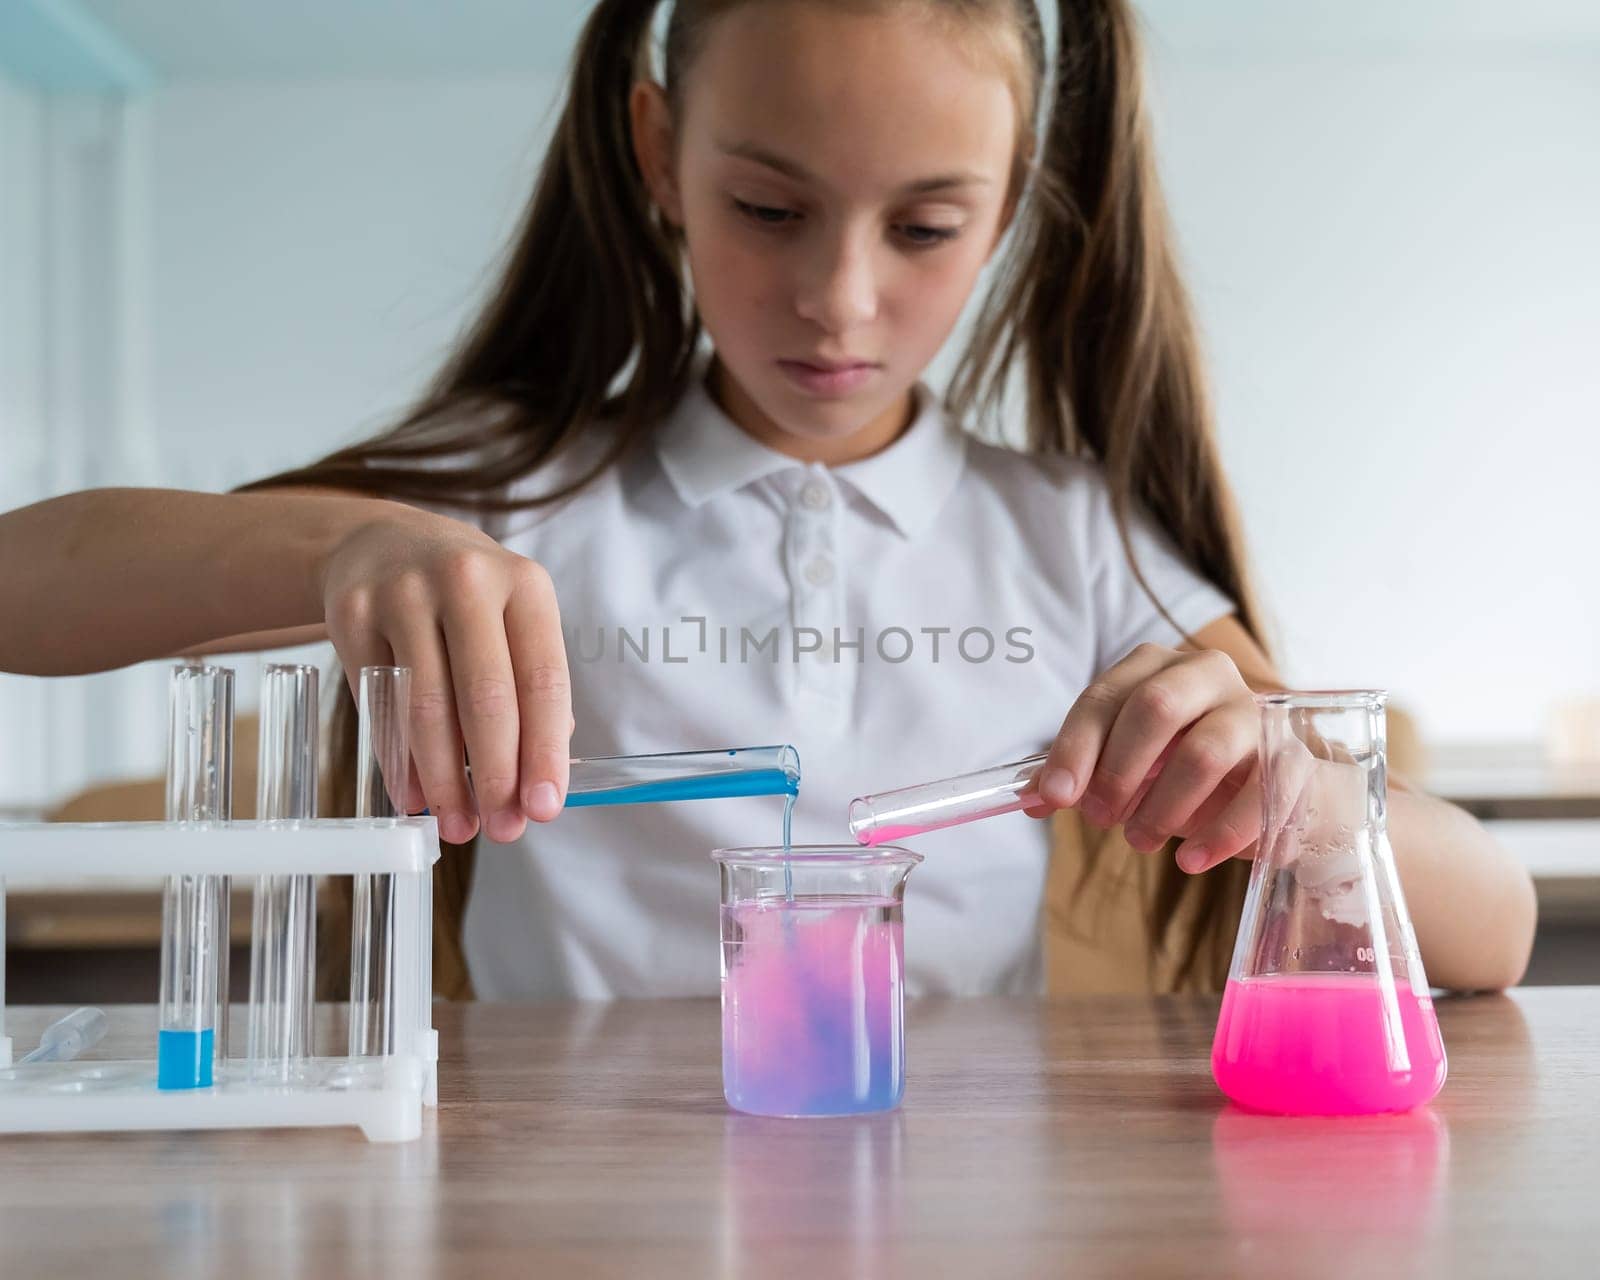 A schoolgirl conducts experiments in a chemistry lesson. Girl pouring colored liquids from a beaker. by mrwed54